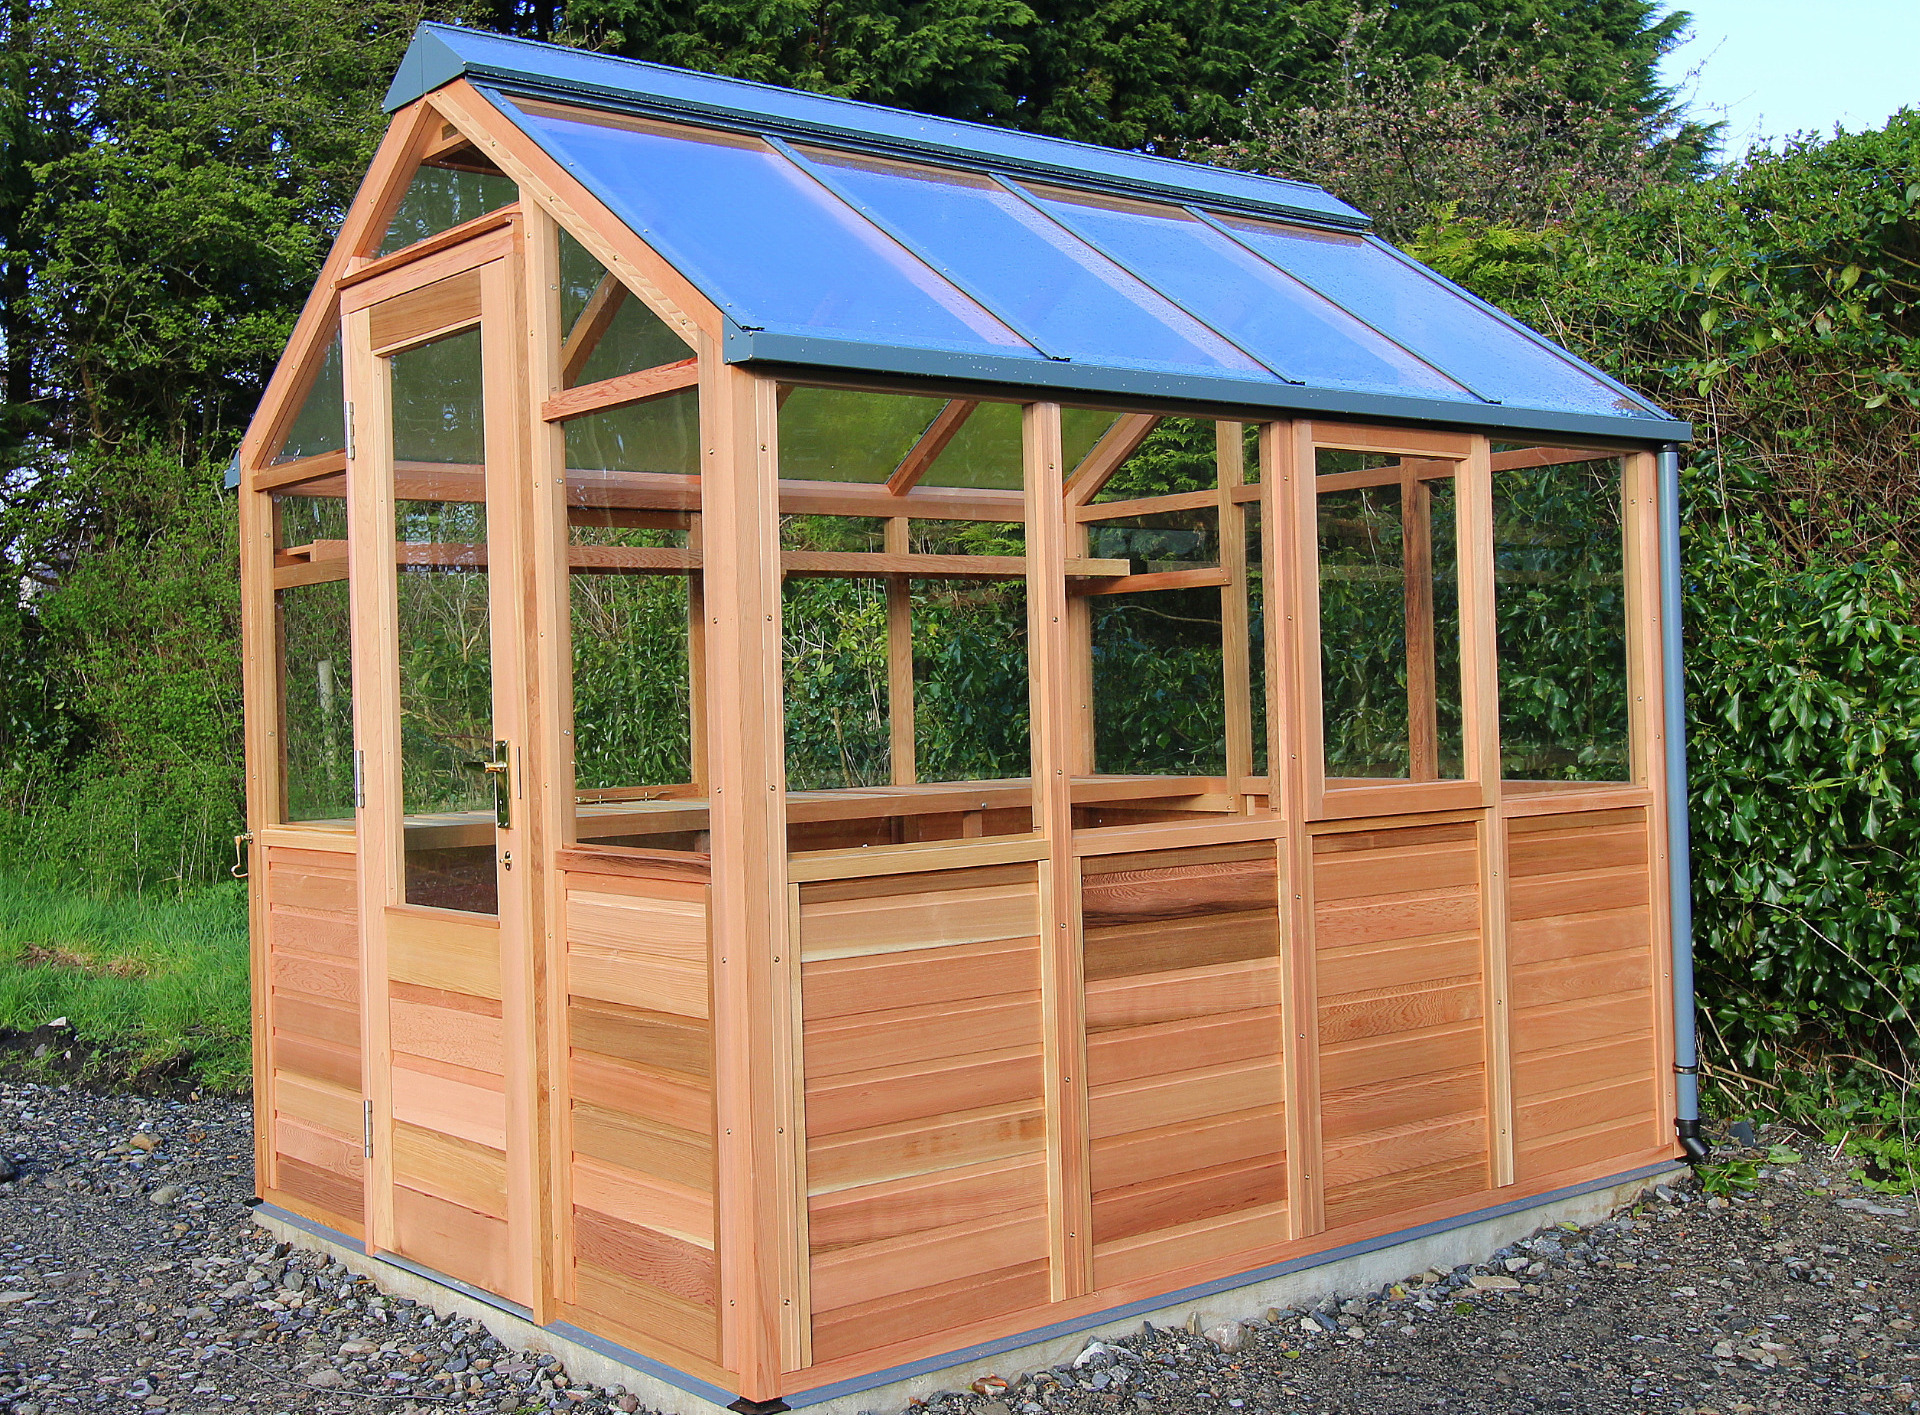 Gabriel Ash Classic Six Greenhouse in Foxford, Co Mayo on cedar base panels and fitted with hinged door |  the only timber greenhouses endorsed by the RHS | Owen Chubb  087-2306128